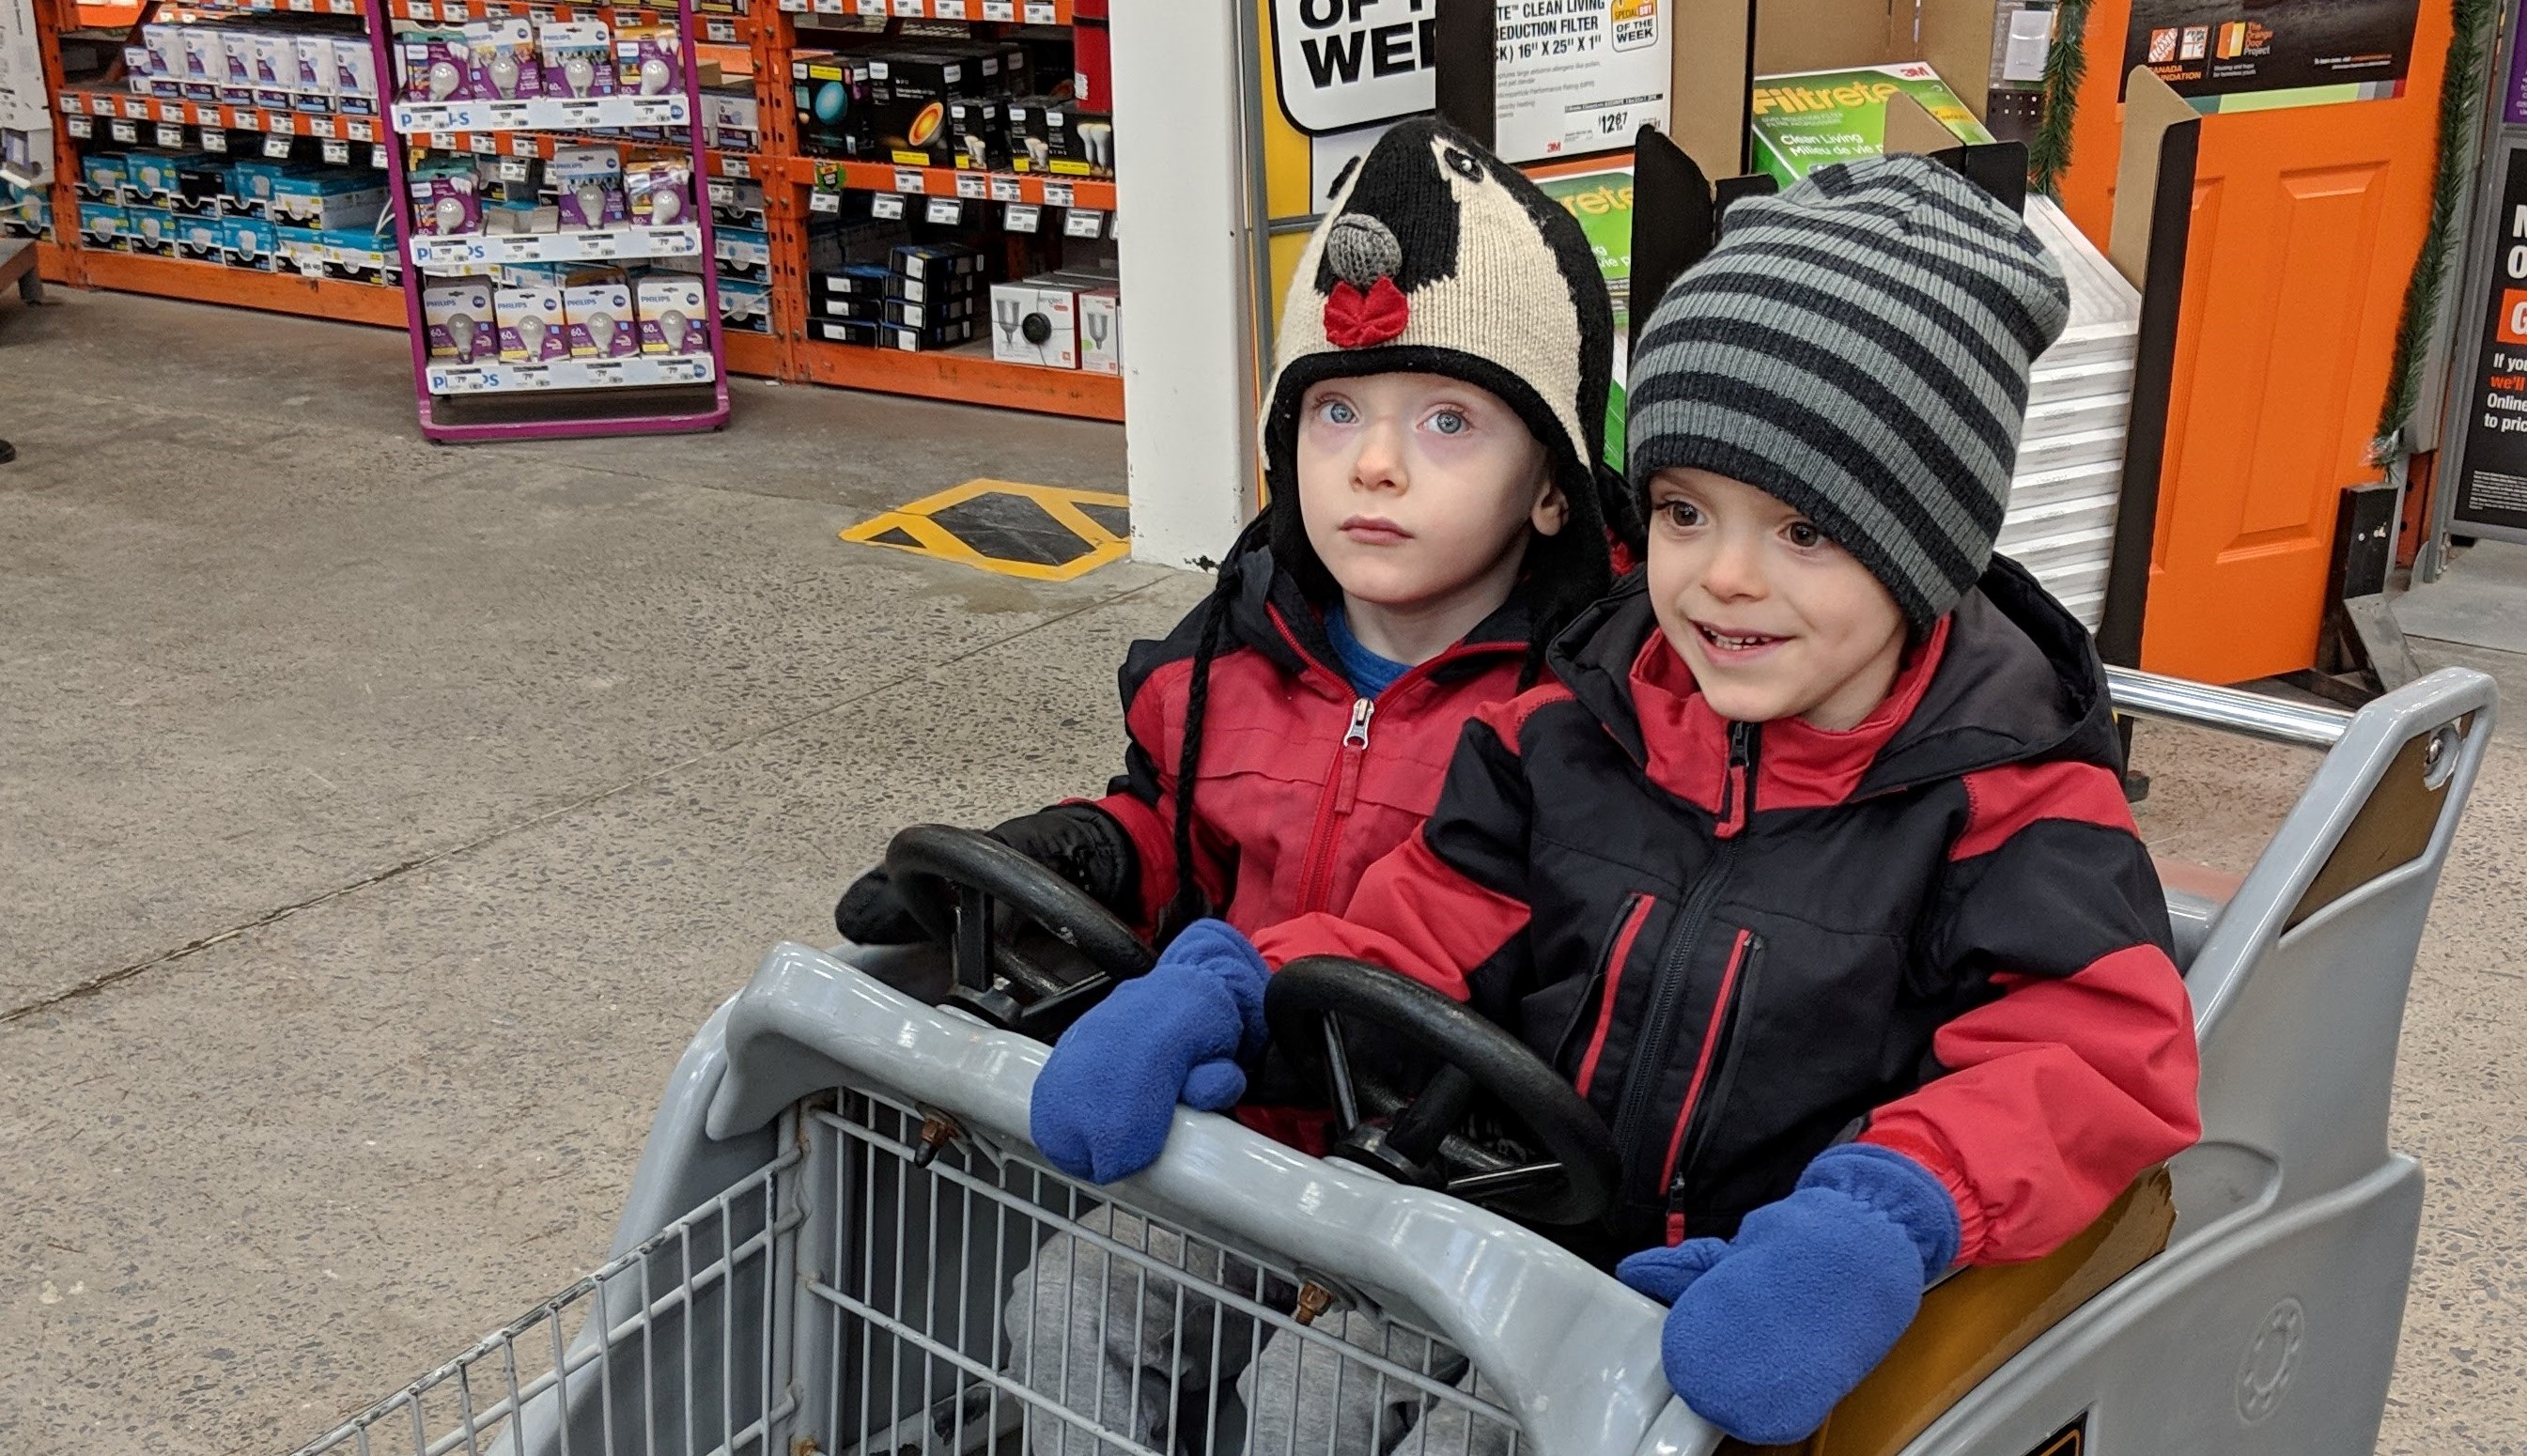 Griffin and James take a ride in the shopping cart while running errands with mom.